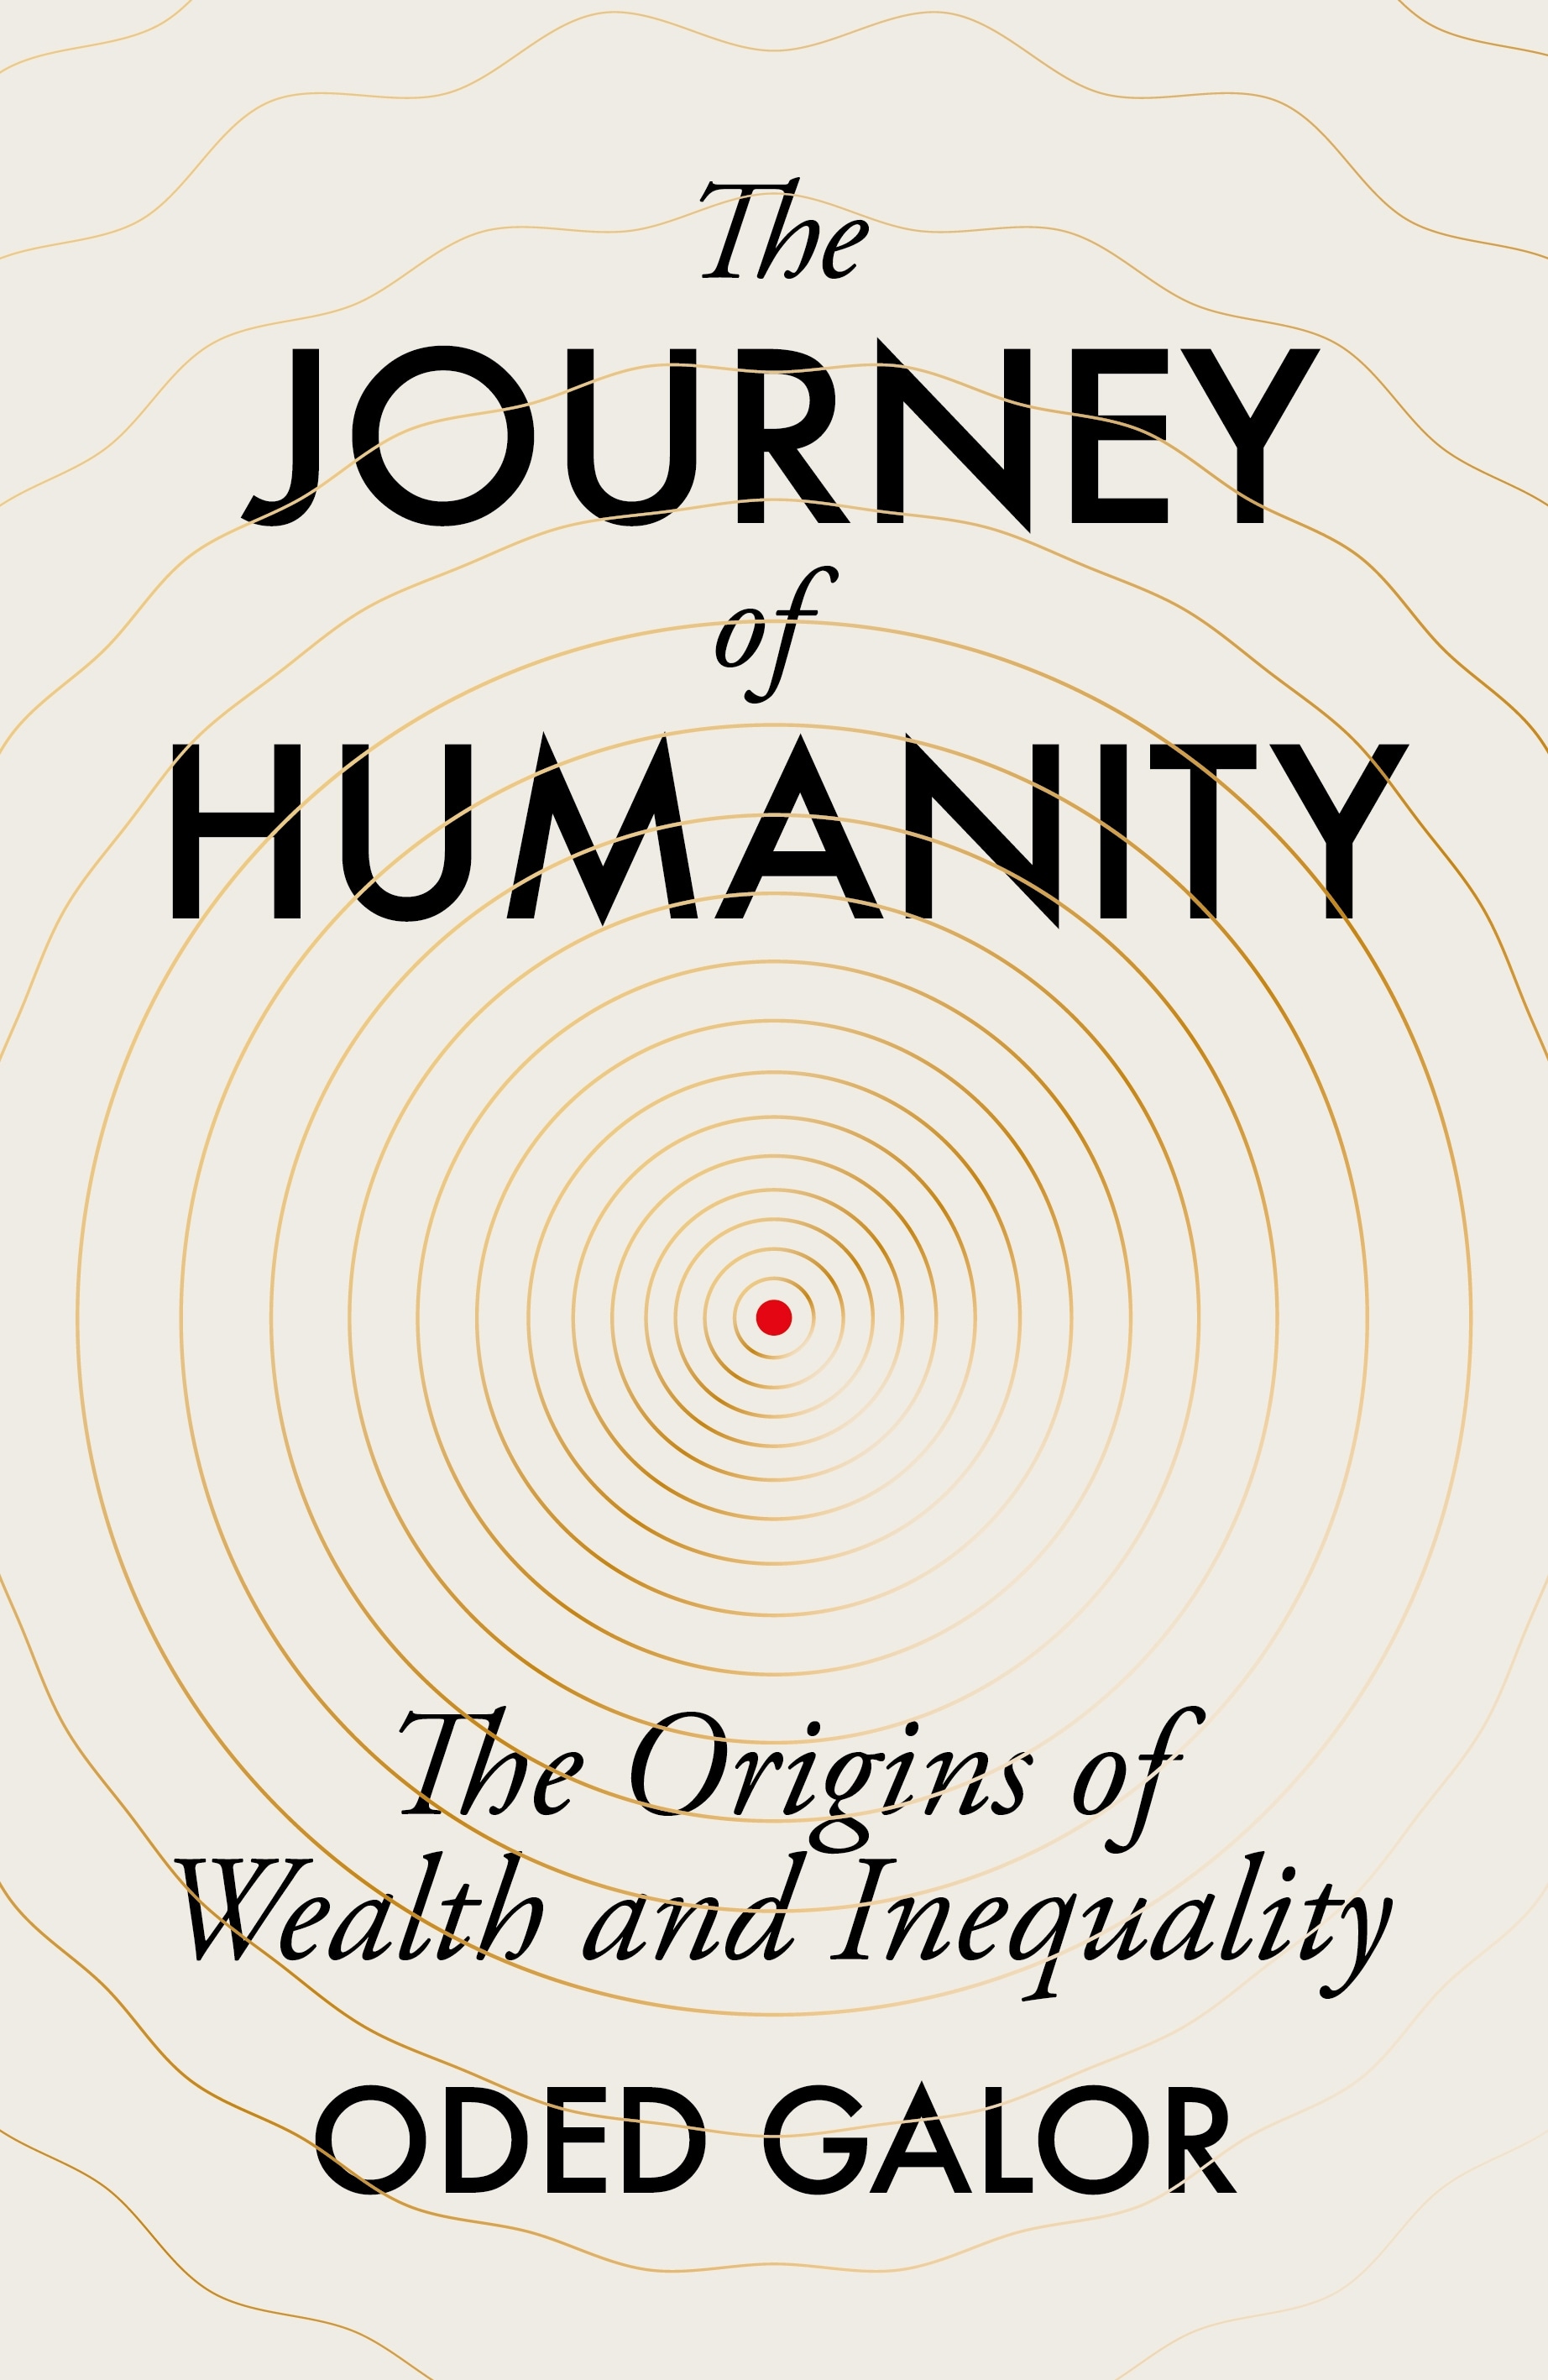 Book “The Journey of Humanity” by Oded Galor — April 7, 2022